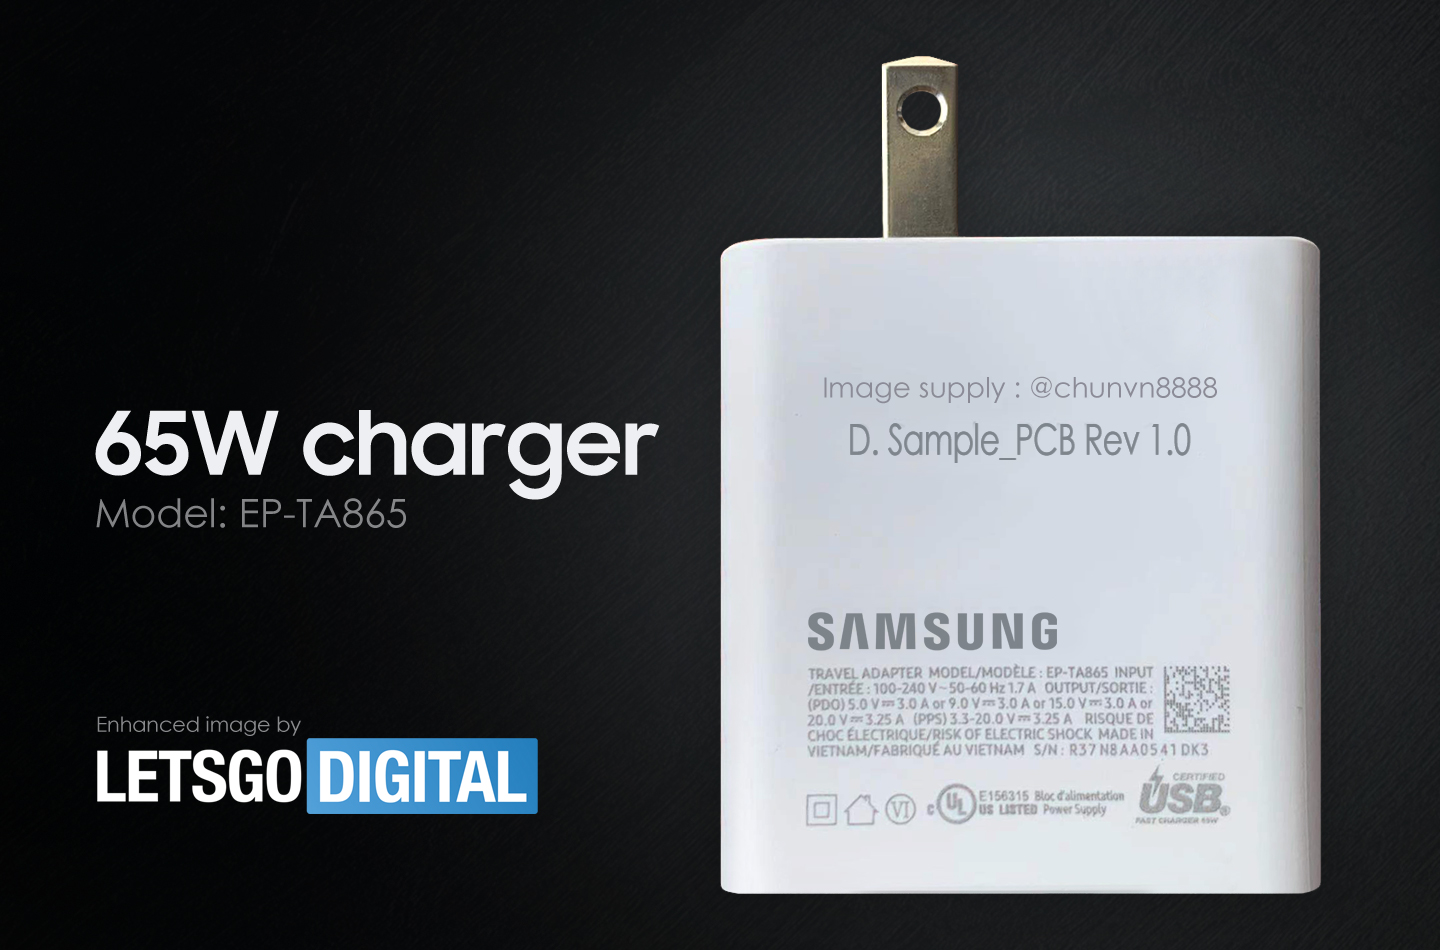 Samsung 65w charger